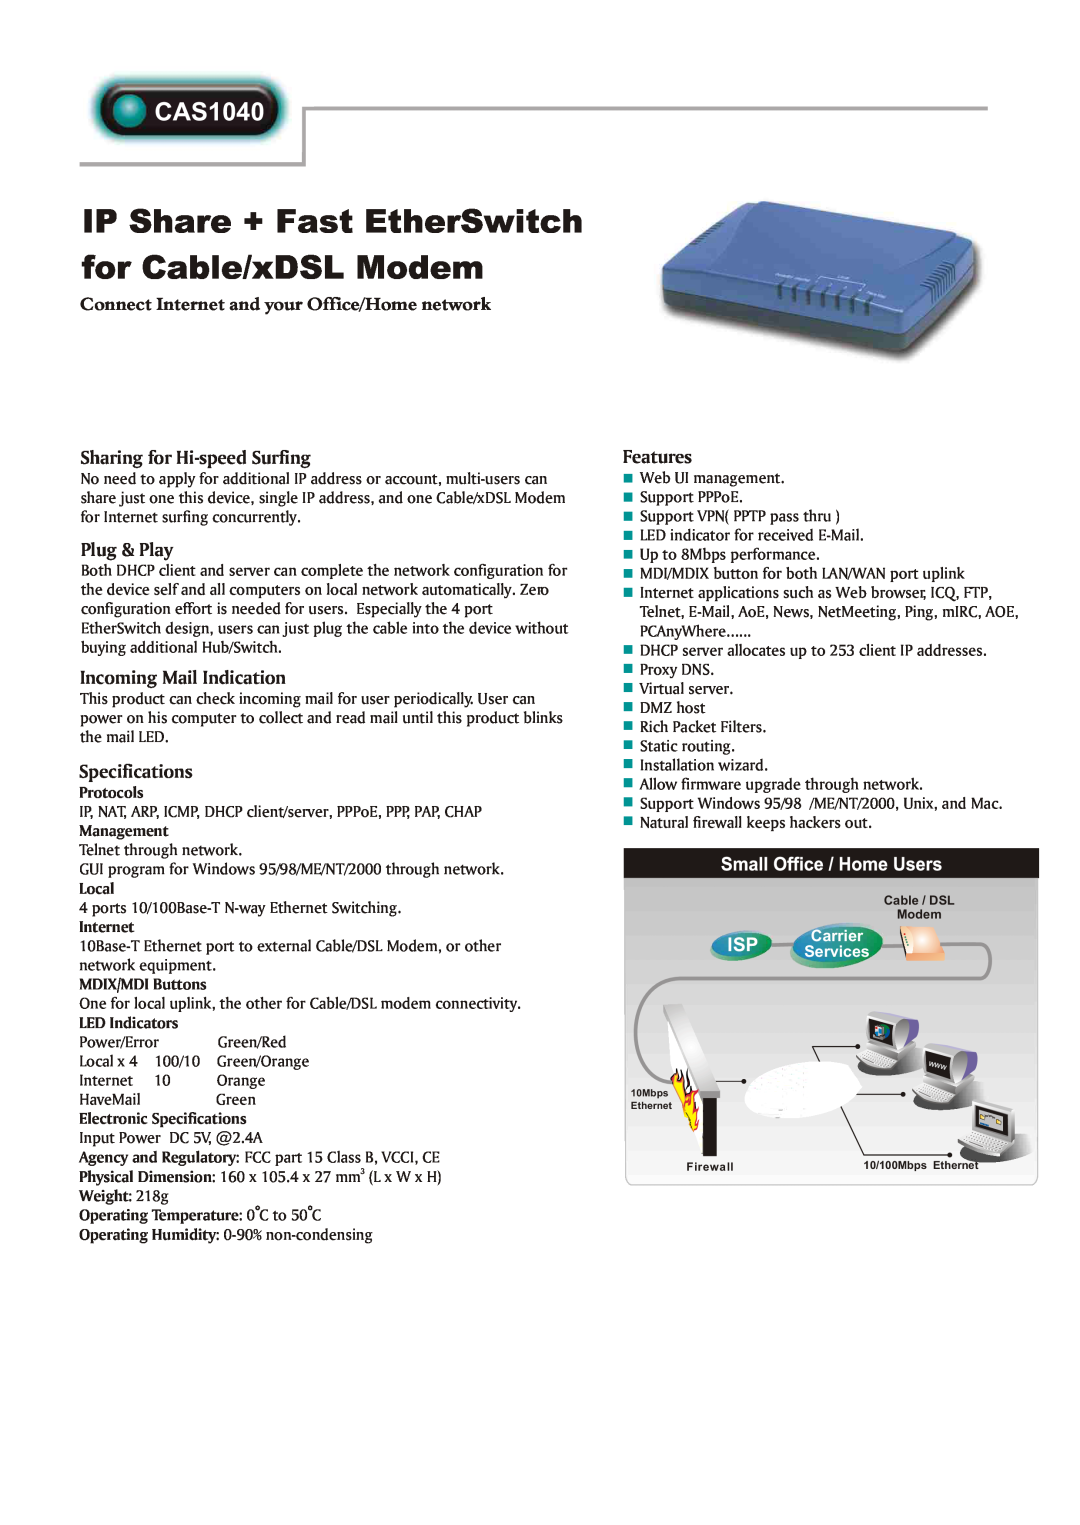 Abocom CAS1040 specifications IP Share + Fast EtherSwitch for Cable/xDSL Modem, Sharing for Hi-speed Surfing, Plug & Play 